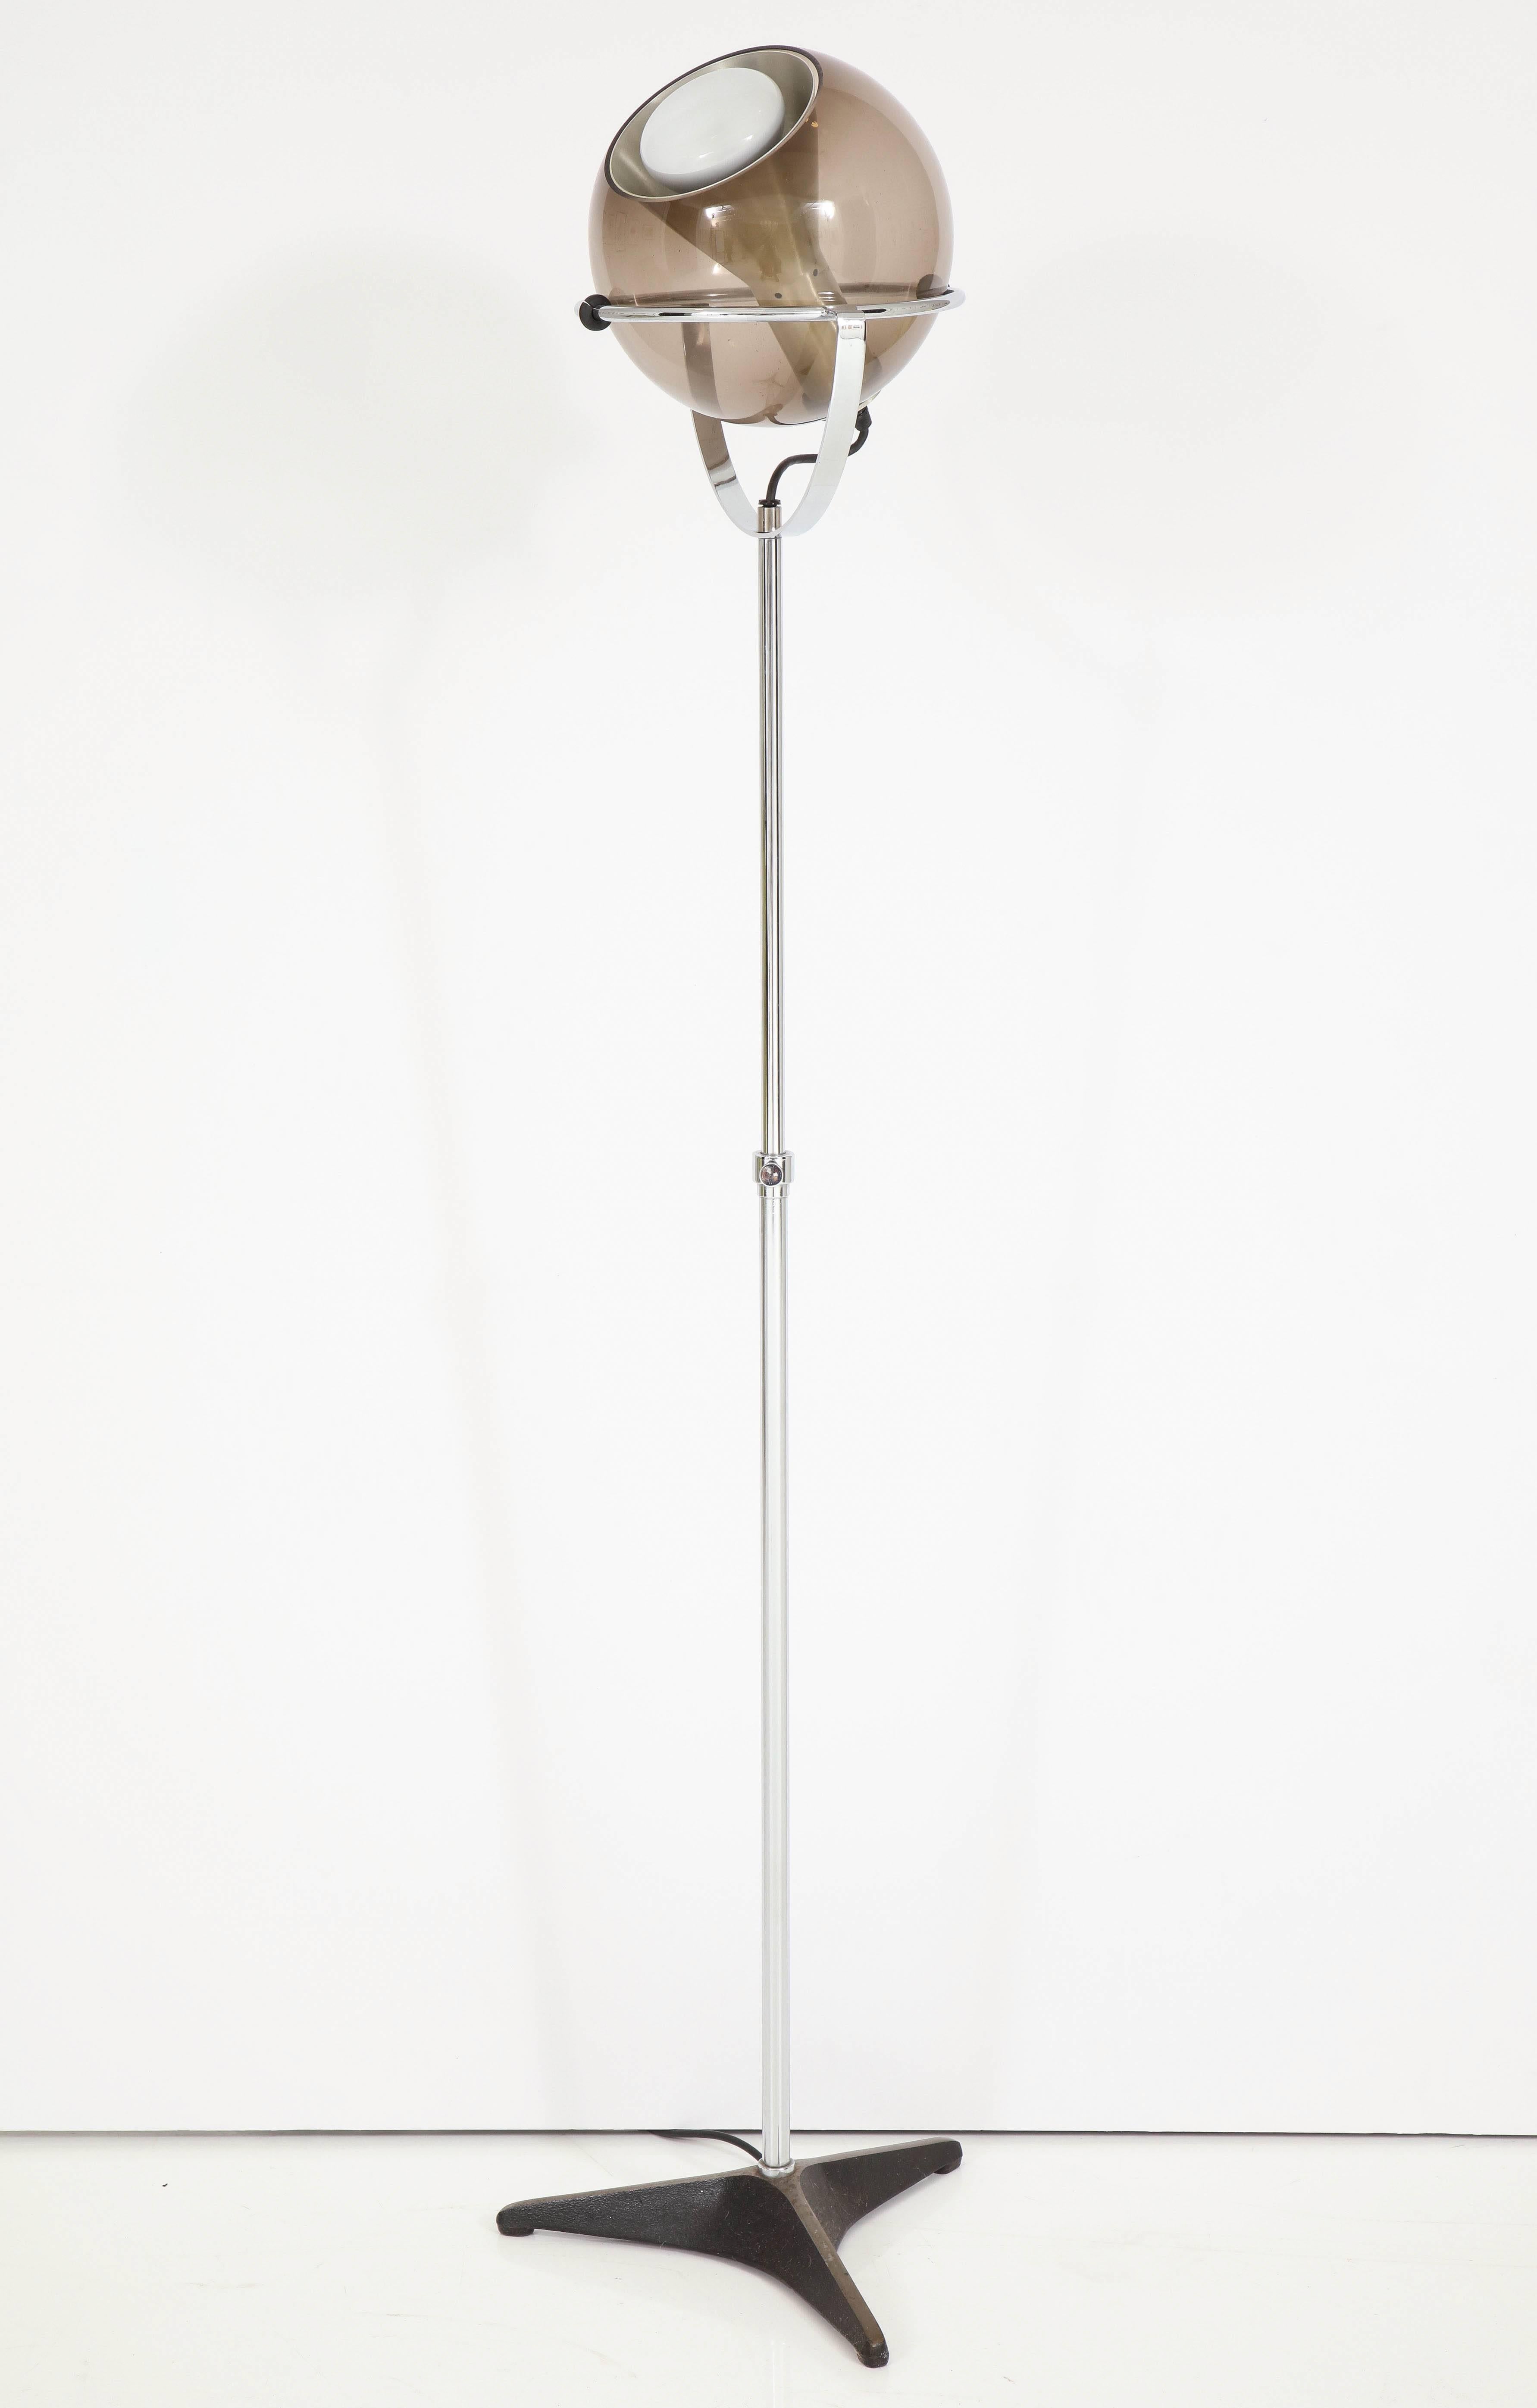 Chrome, mid-century modern floor lamp by RAAK, circa 1960. A great lamp to light up a painting.